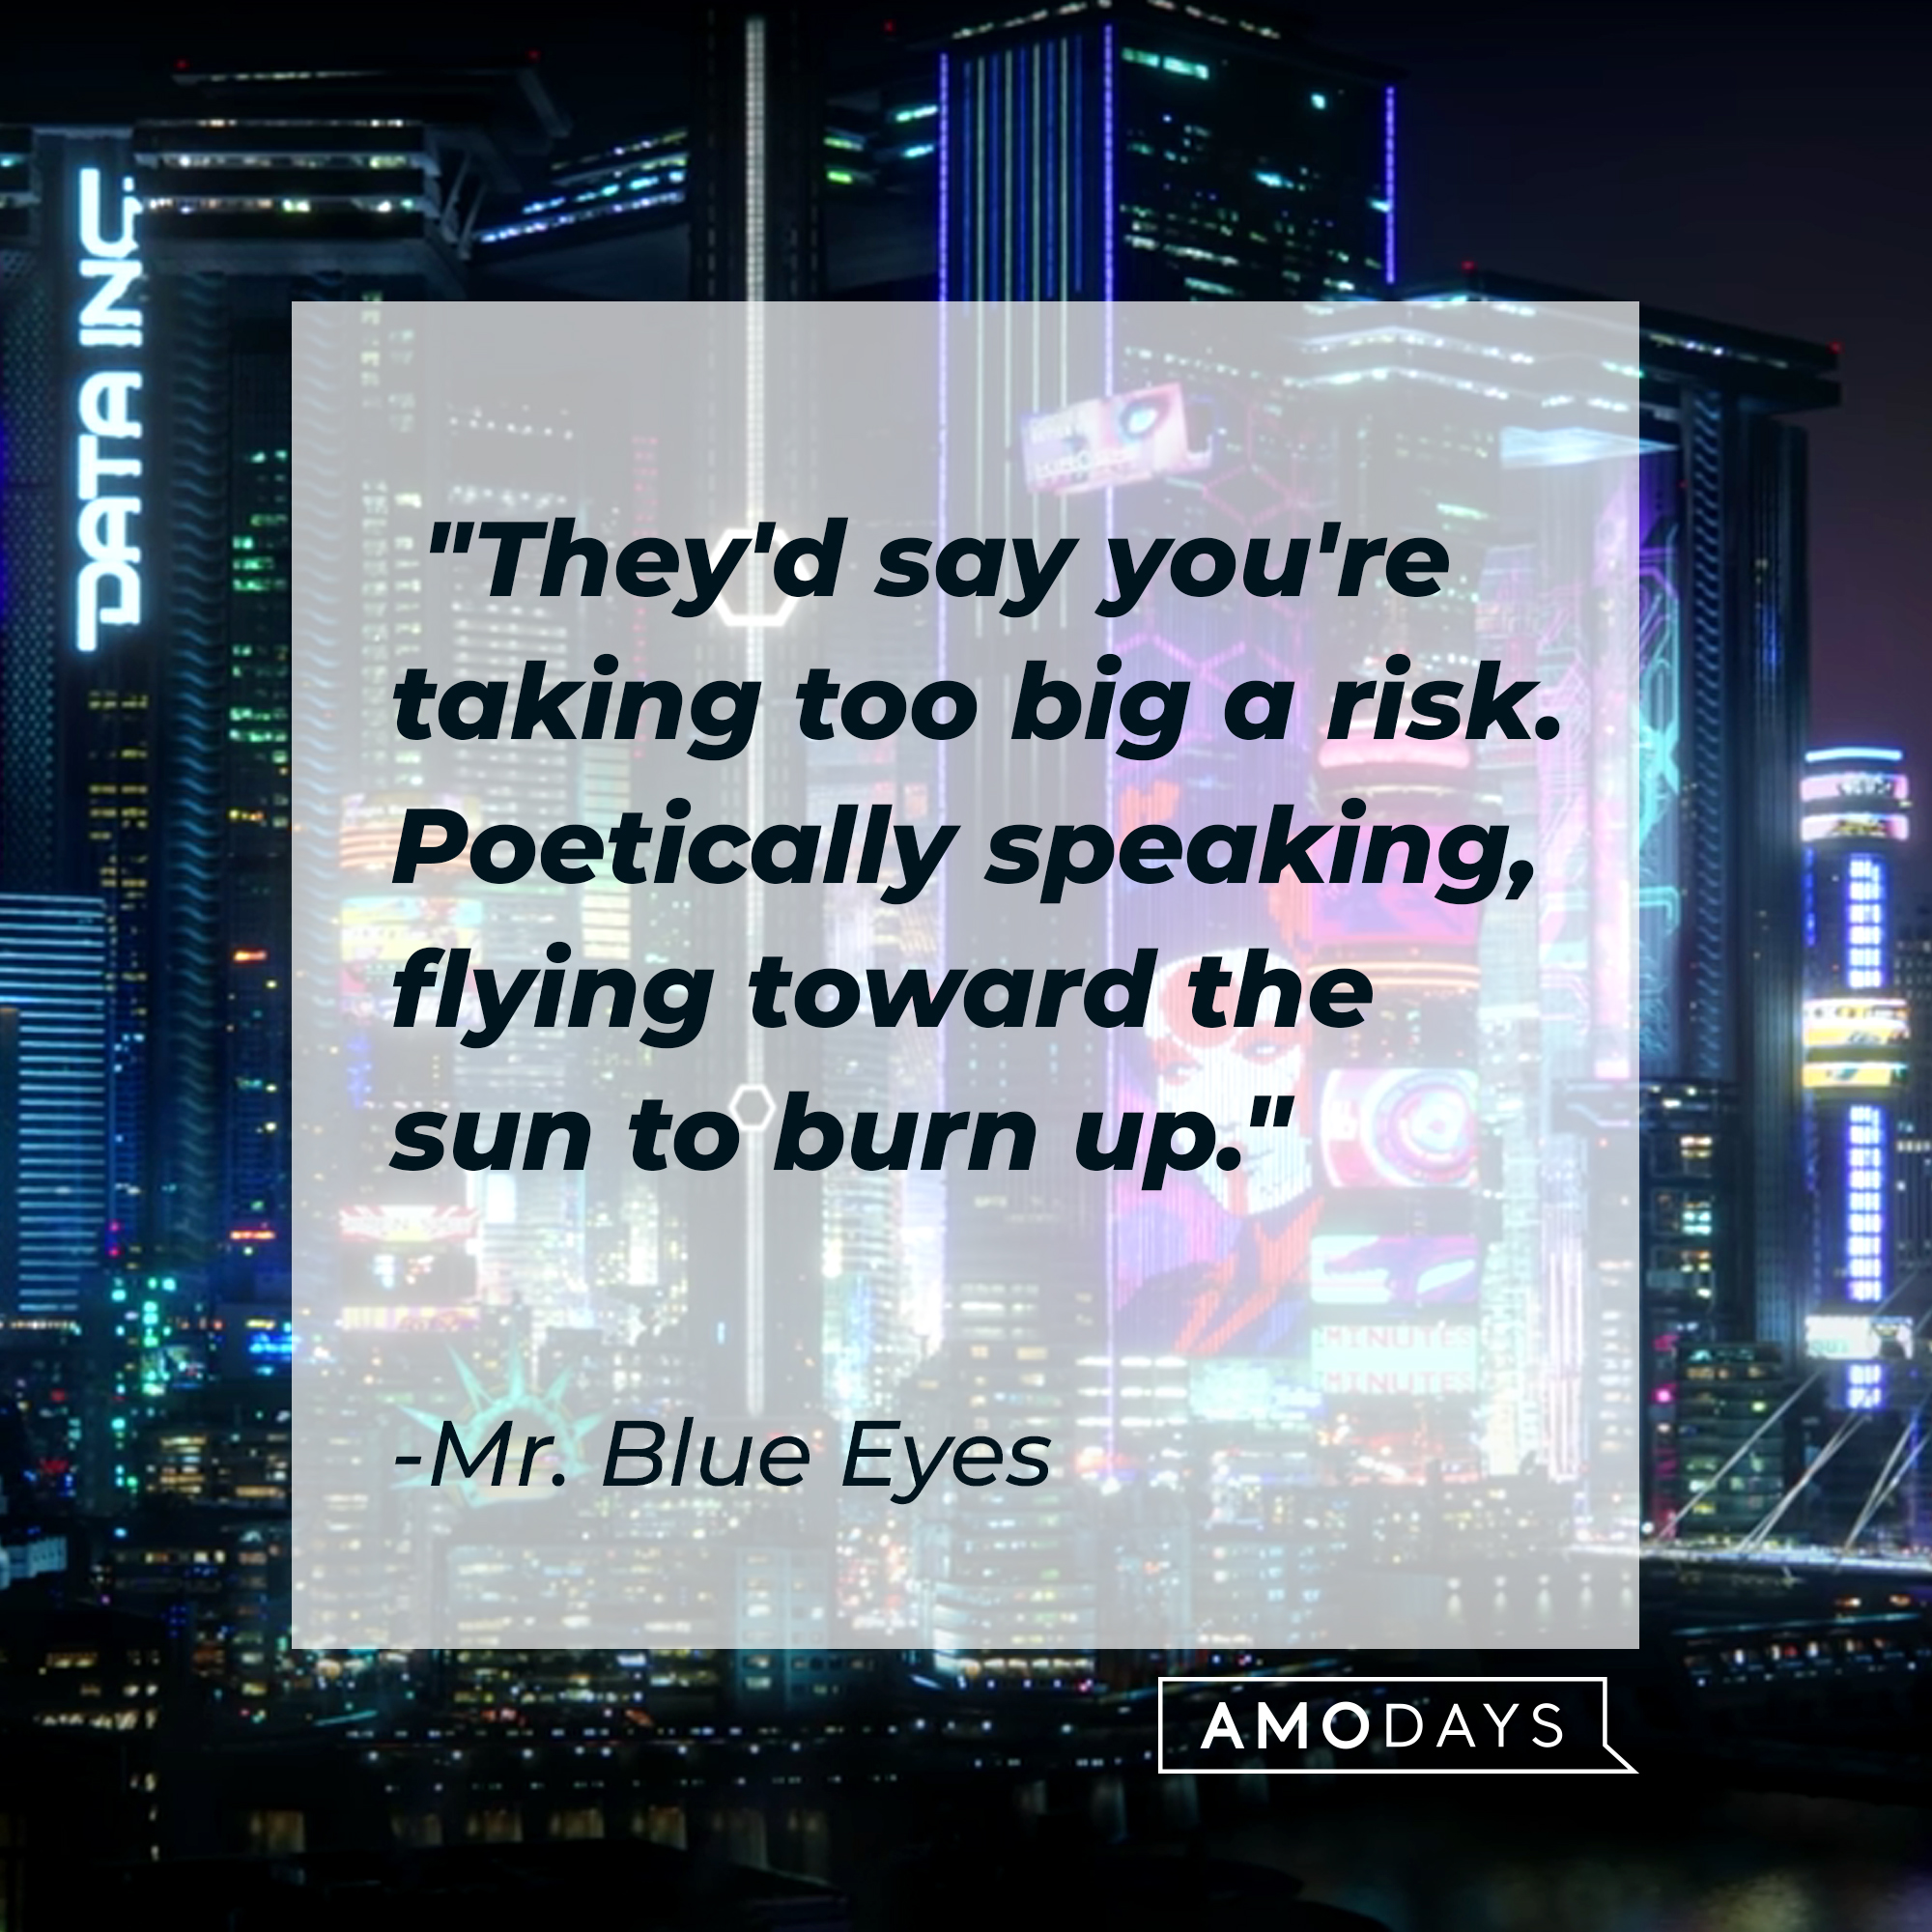 Mr. Blue Eye's quote: "They'd say you're taking too big a risk. Poetically speaking, flying toward the sun to burn up." | Source: youtube.com/CyberpunkGame